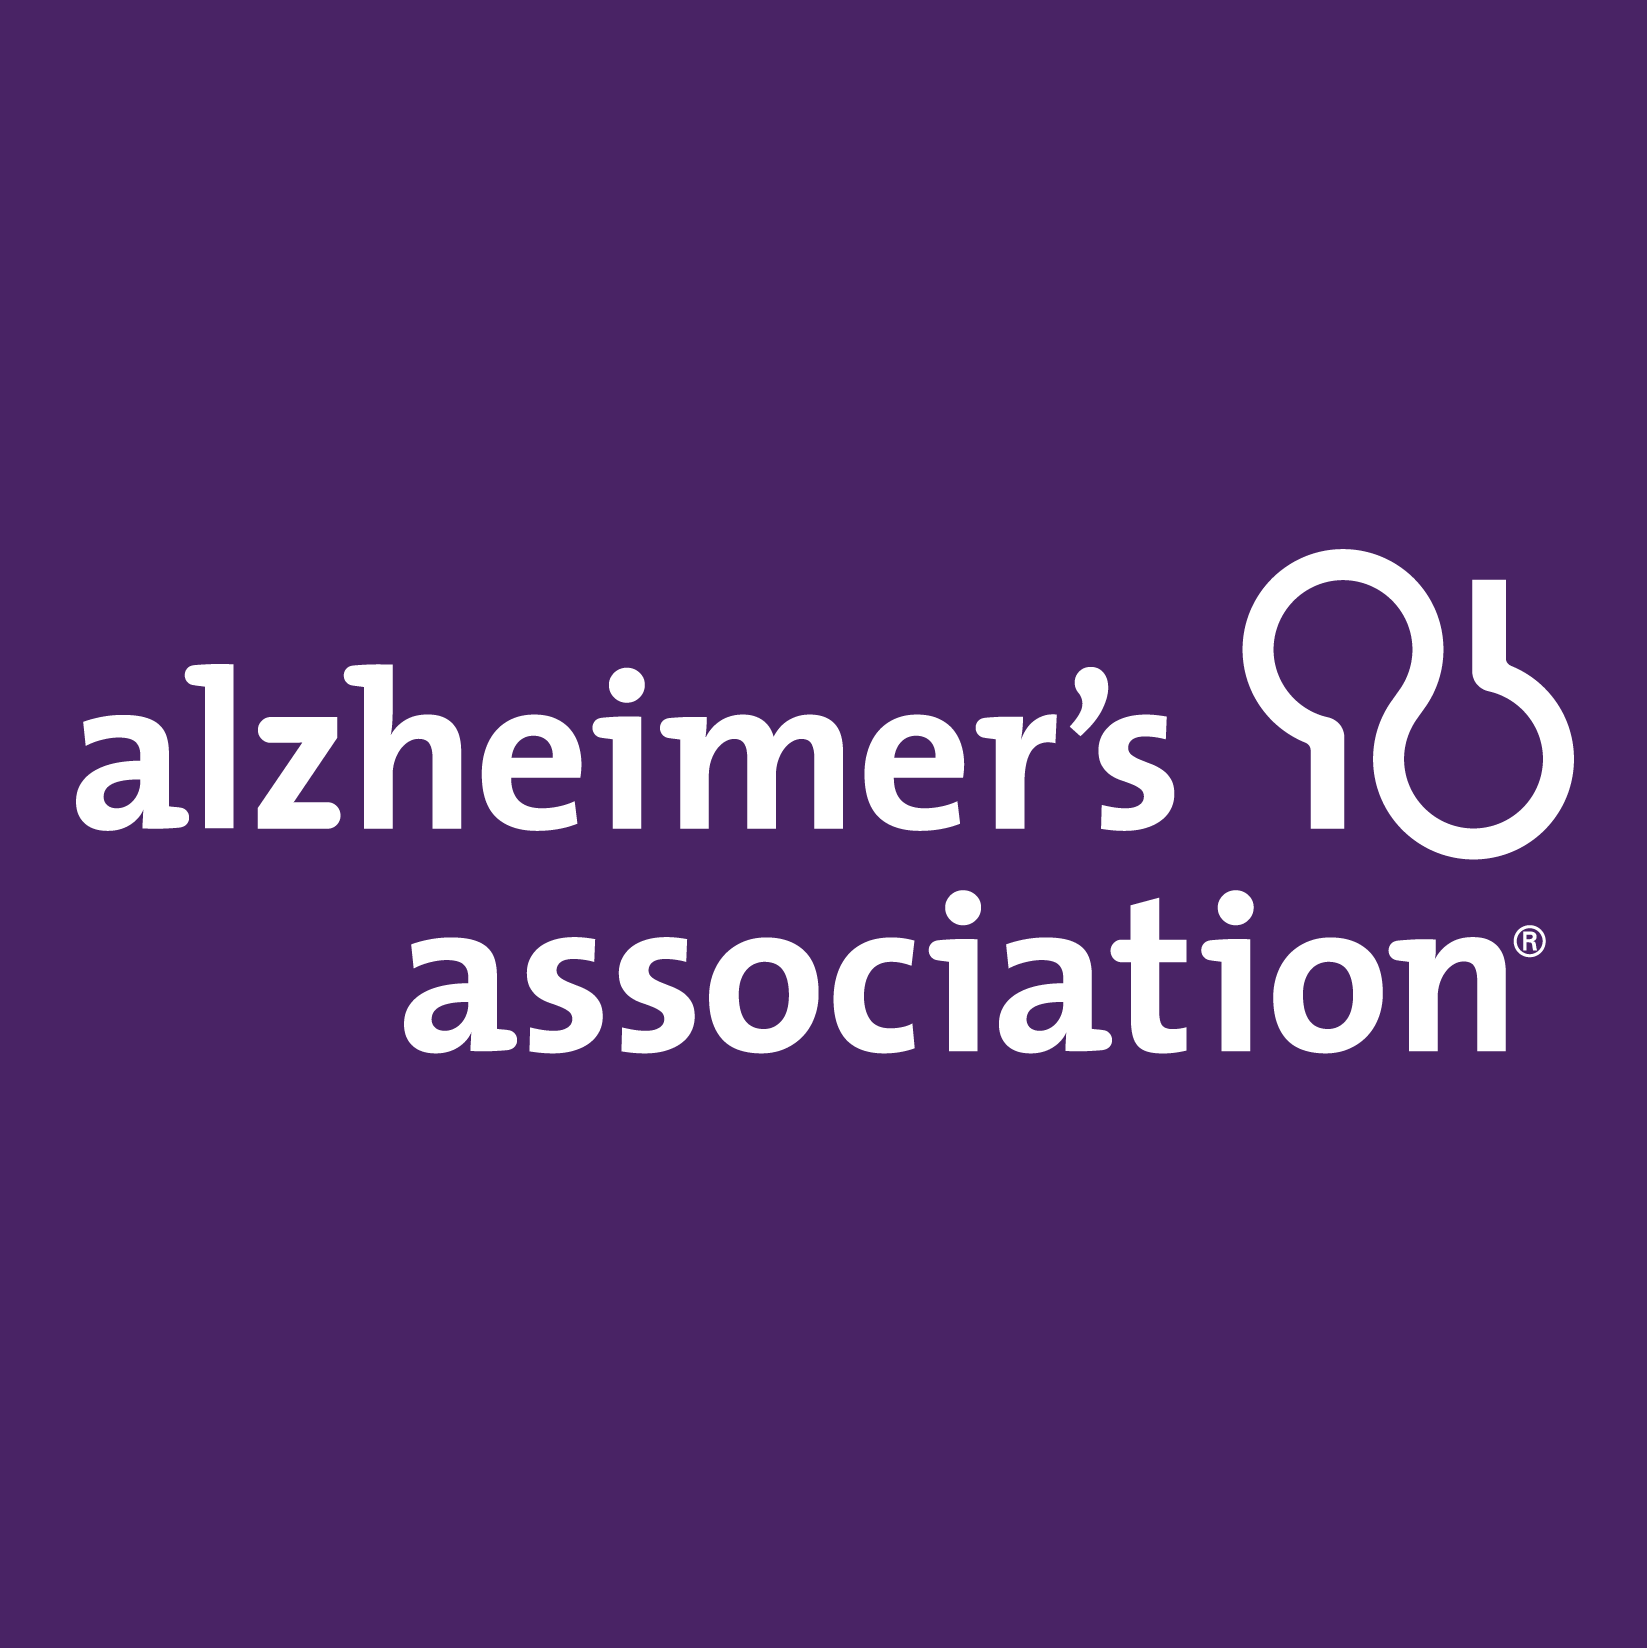 purple background with white lettering that reads Alzheimer's association